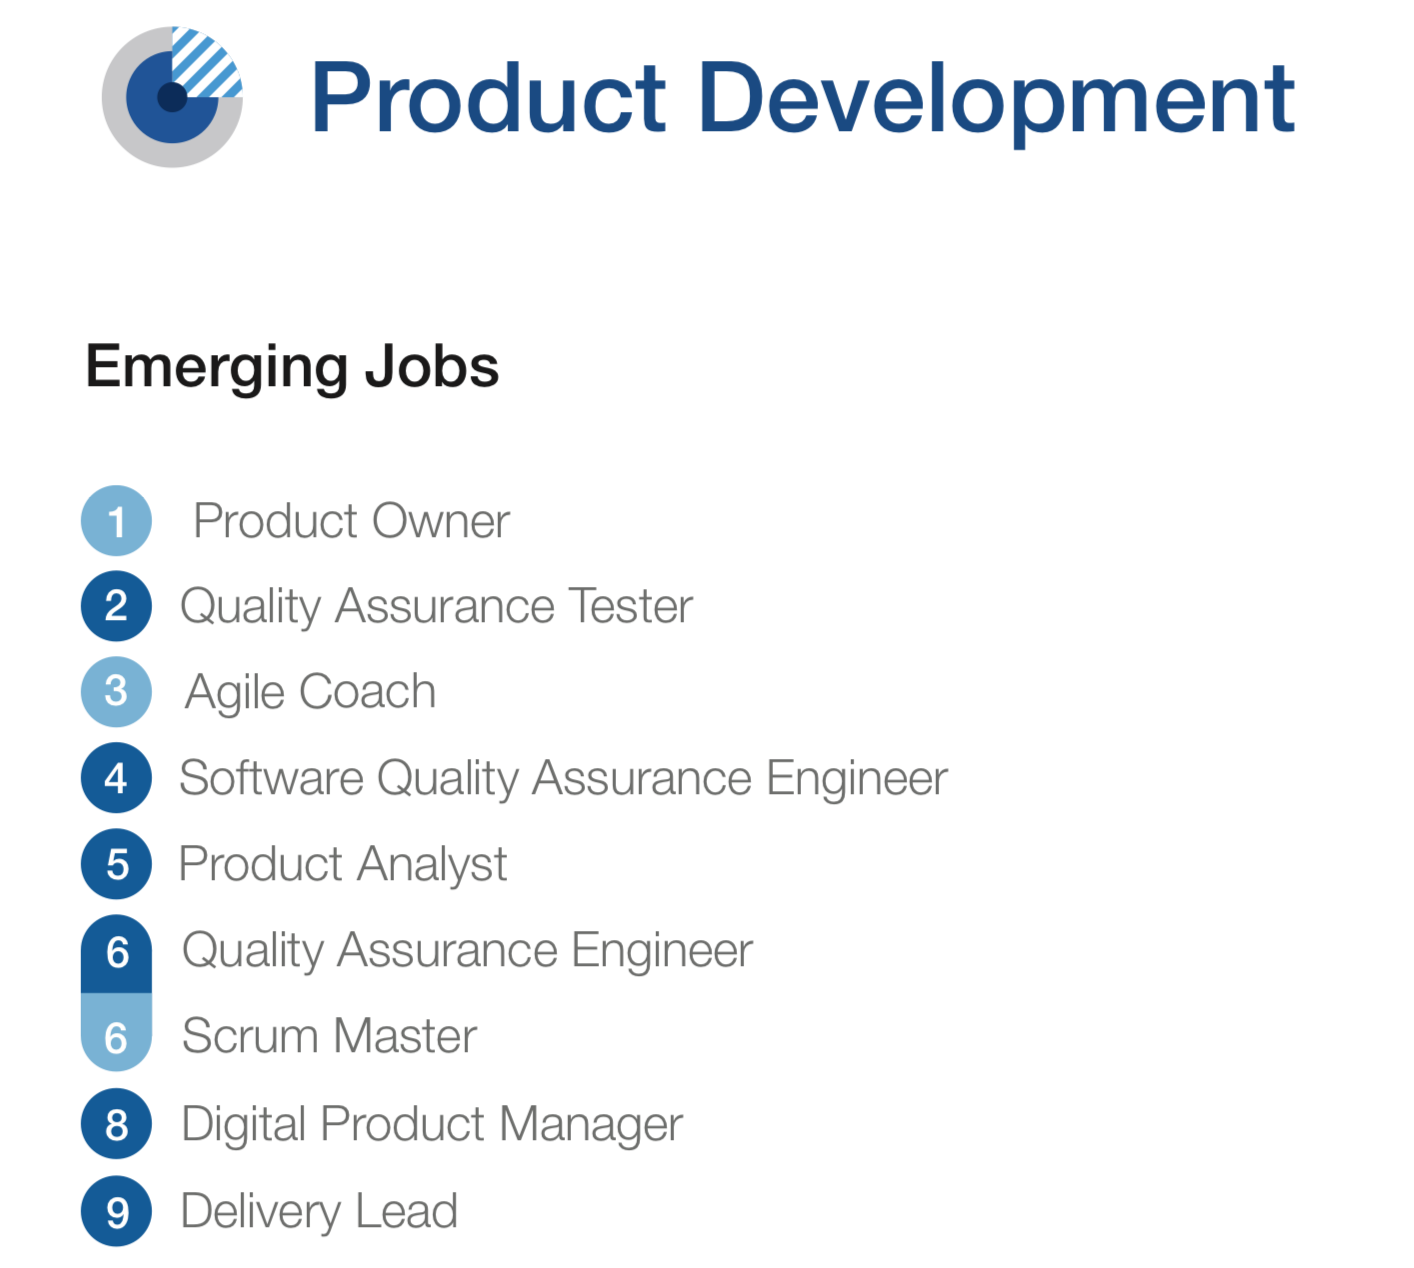 Product owner, agile coach, and ScrumMaster are all in the top 10 for new jobs in product development. Also in the list are 3 quality assurance jobs (at 2, 4, and tied for 6). Product analyst, digital product manager, and delivery lead round out the list.